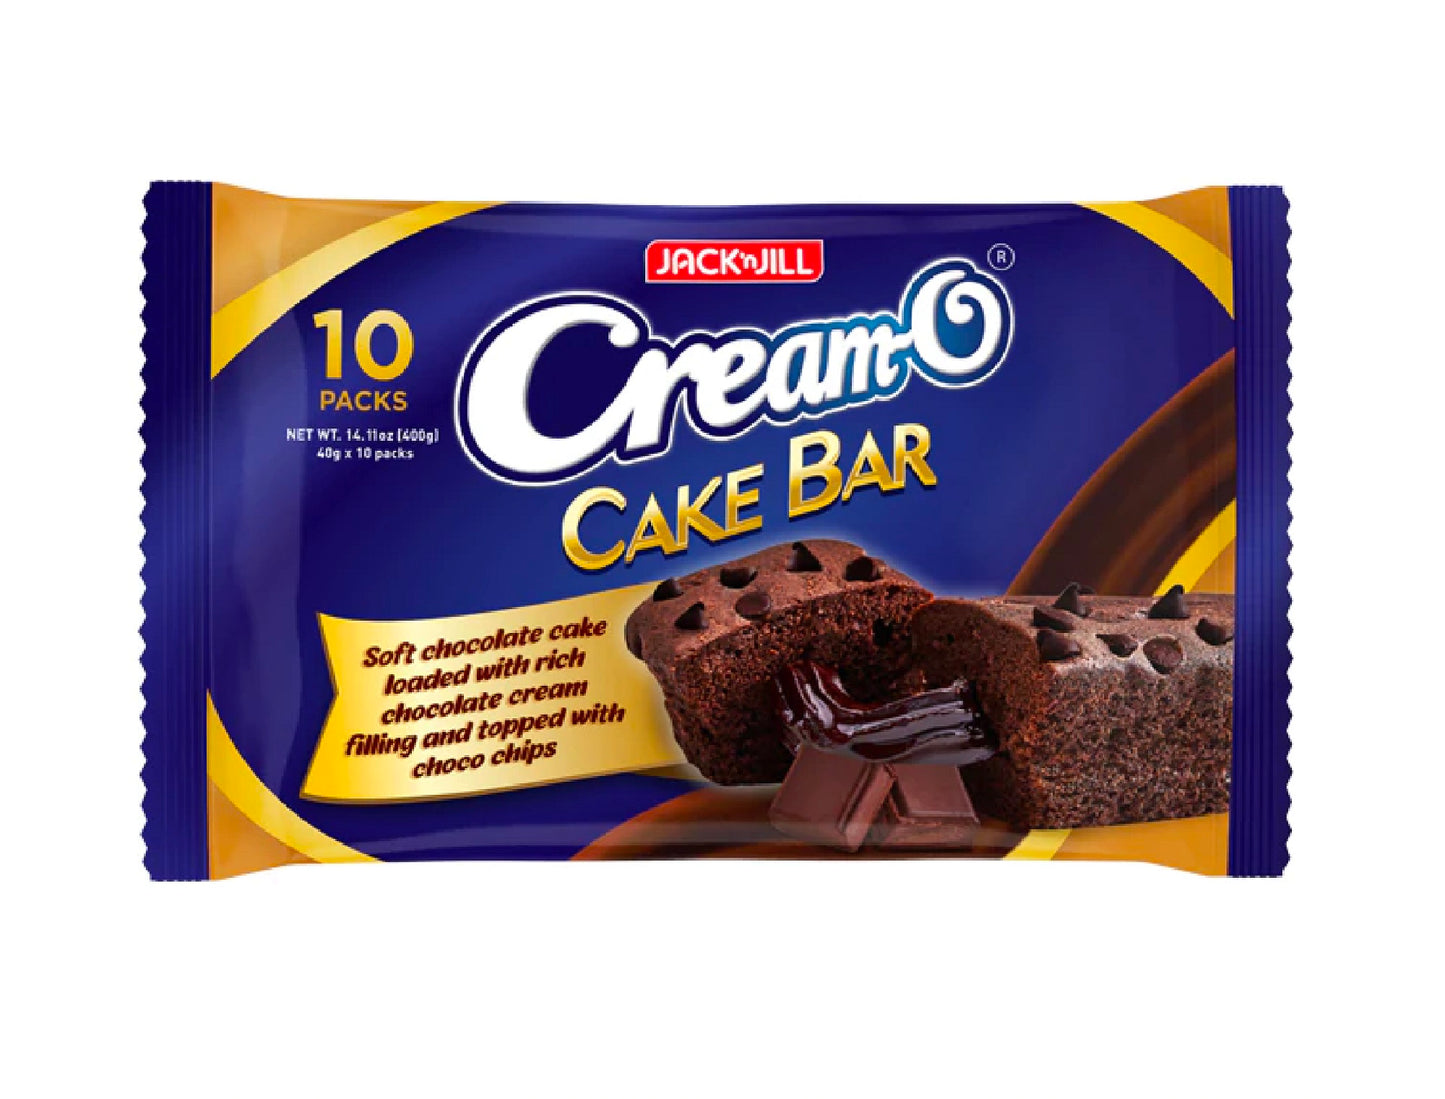 Jack'nJill Cream-O Cake Bar Soft Chocolate Cake Loaded with Rich Chocolate Cream Filling and Topped with Choco Chips | 10 Pcs x 40g